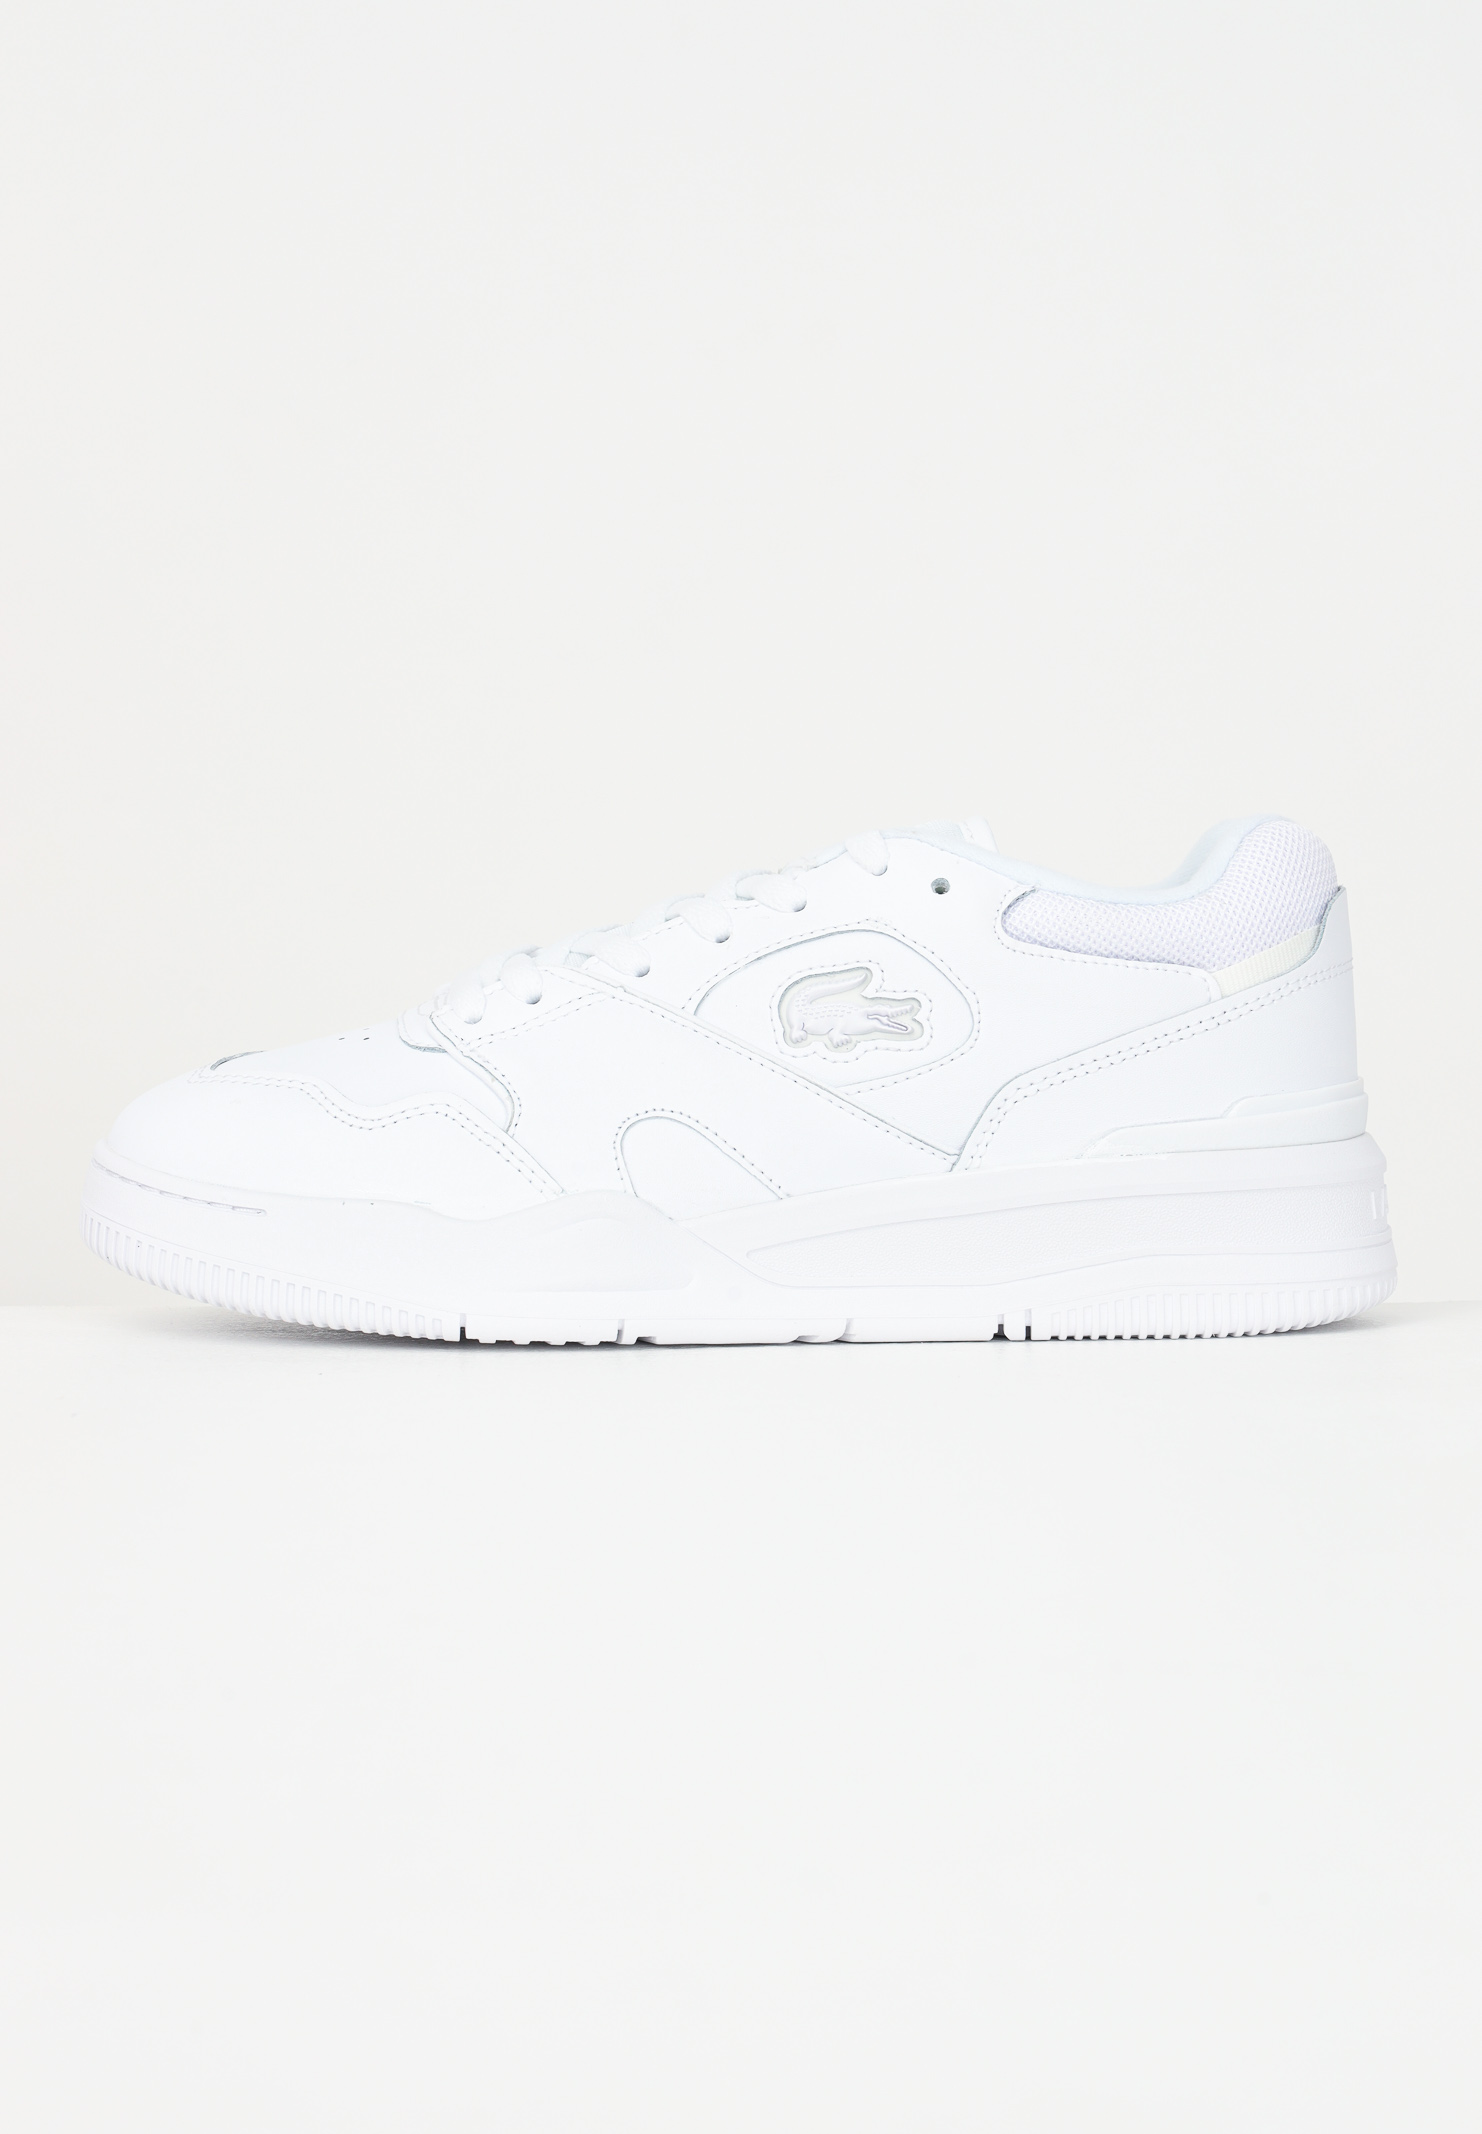 White casual sneakers for men with logo - LACOSTE - Pavidas